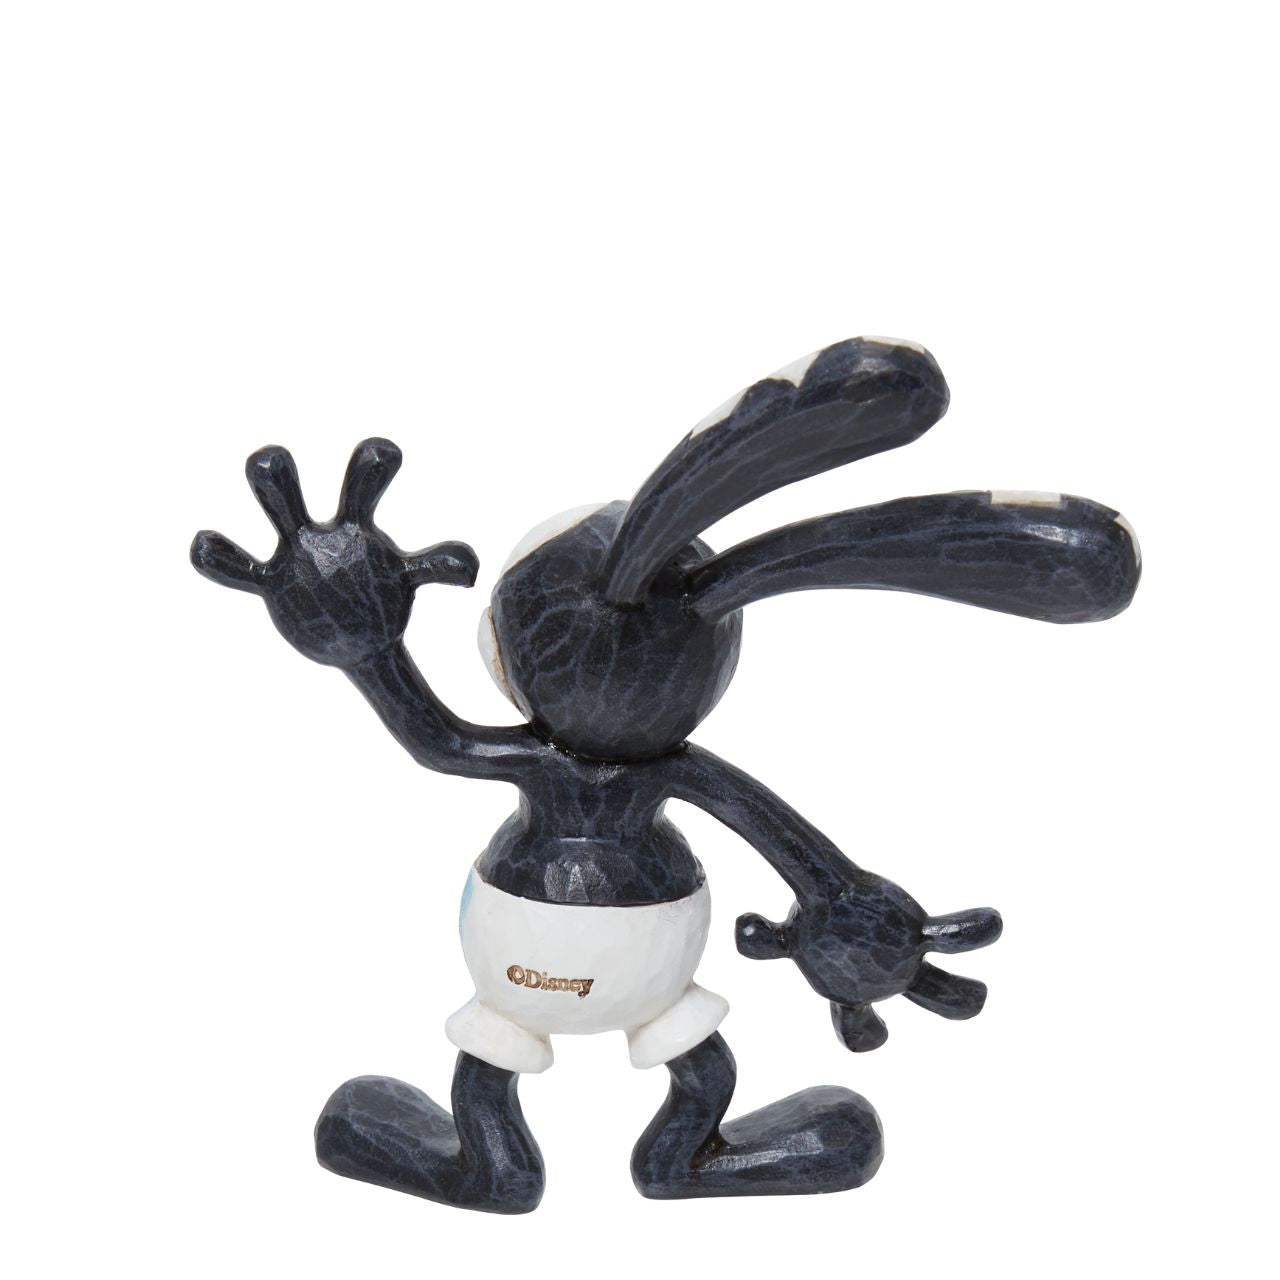 This cute piece of Disney's Oswald has been recreated as a collectible Mini Figurine. Designed by award winning artist Jim Shore, hand crafted using high quality cast stone and hand painted. 